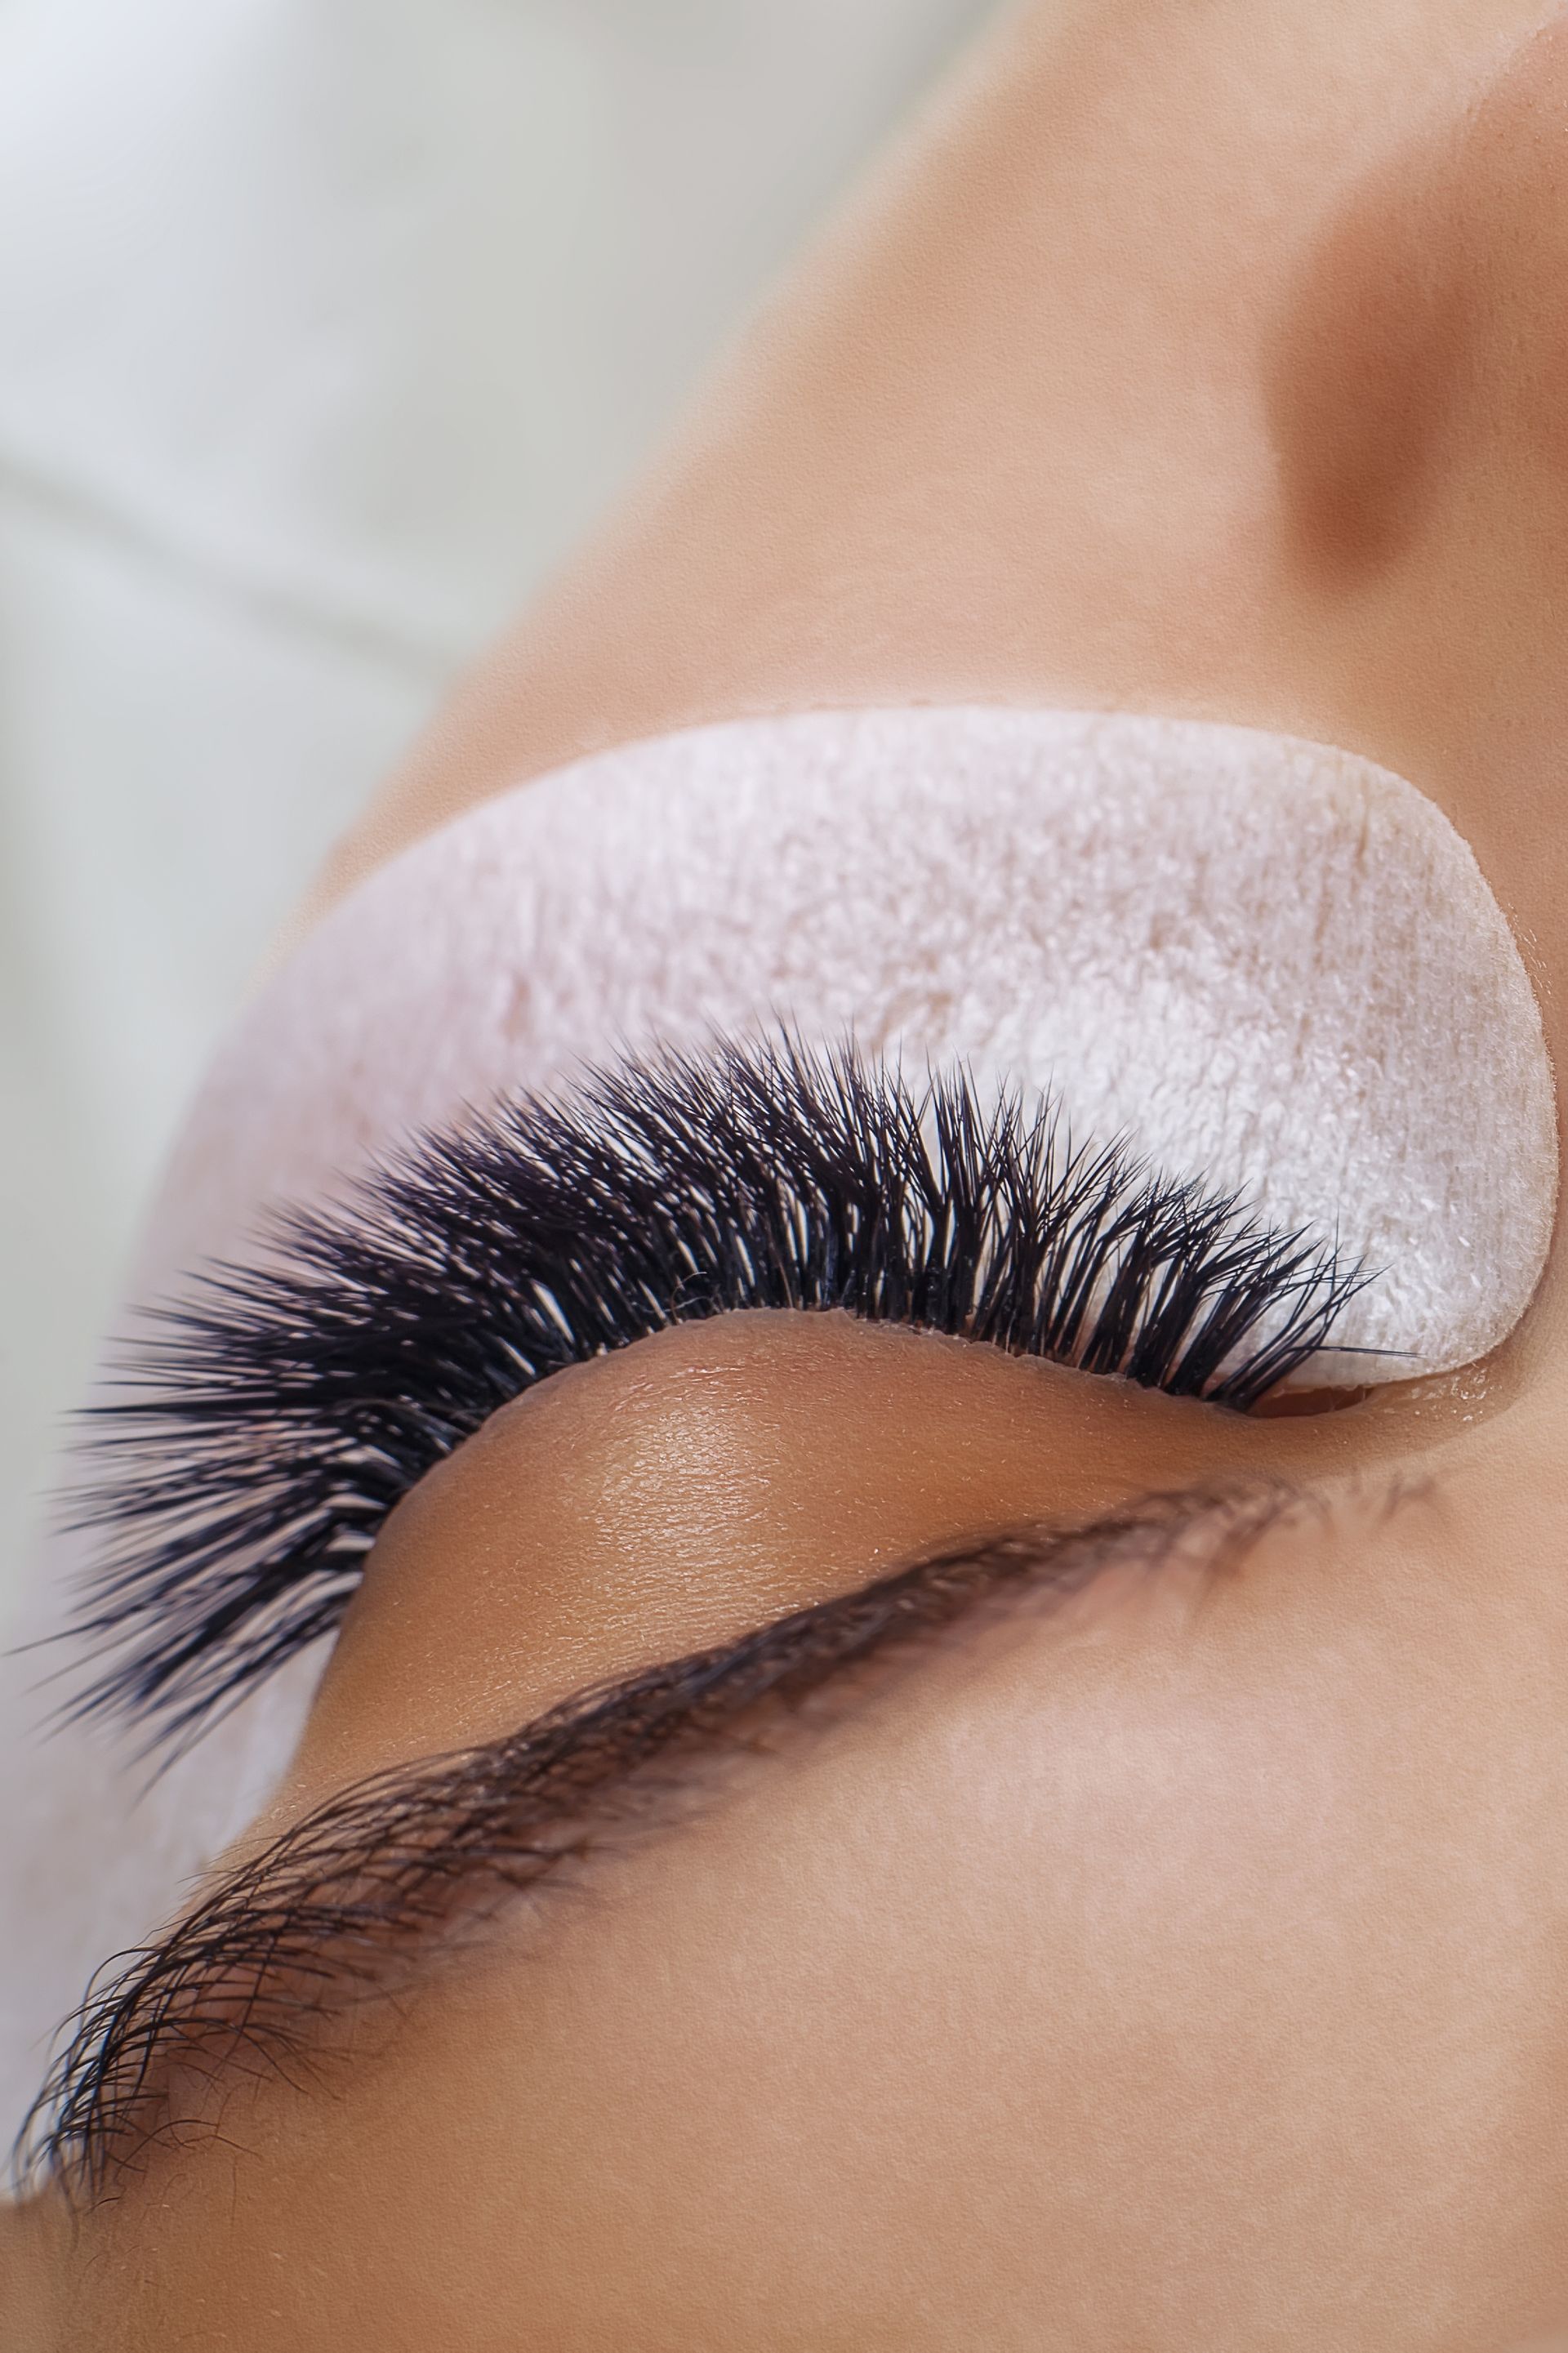 A close up on woman's eyelashes